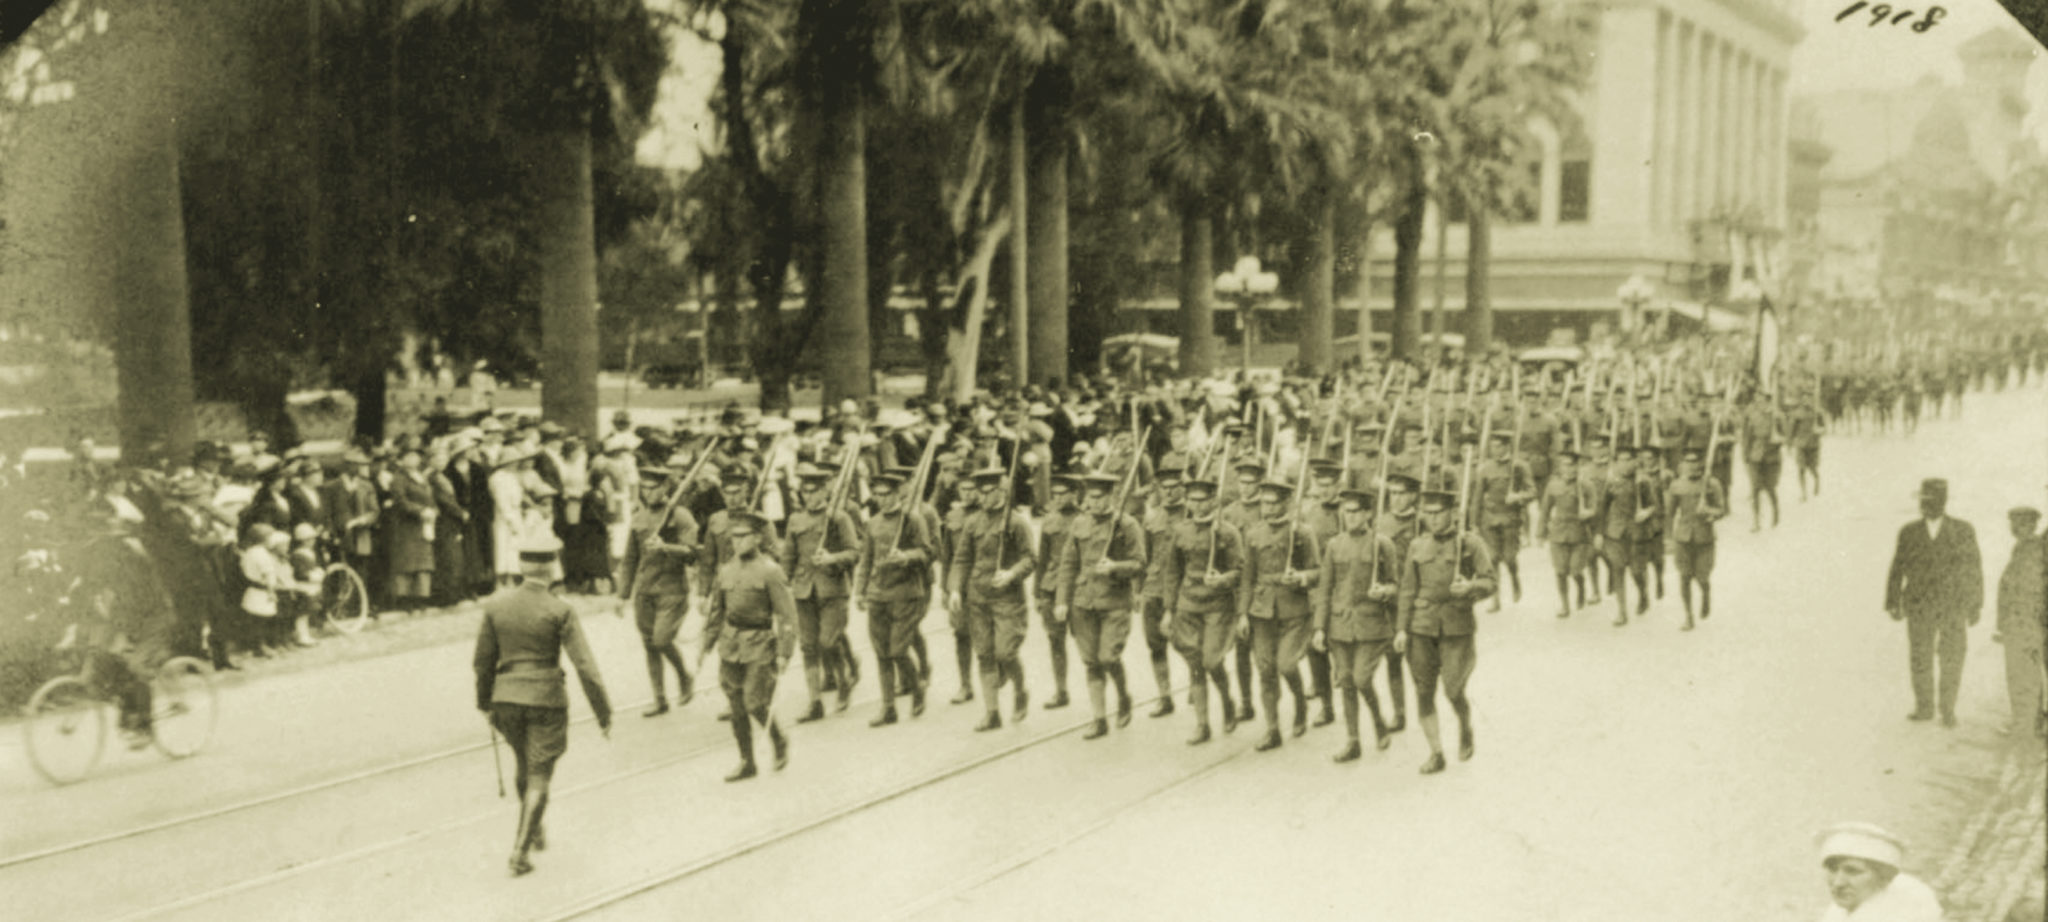 SCU Cadets on parade in 1918